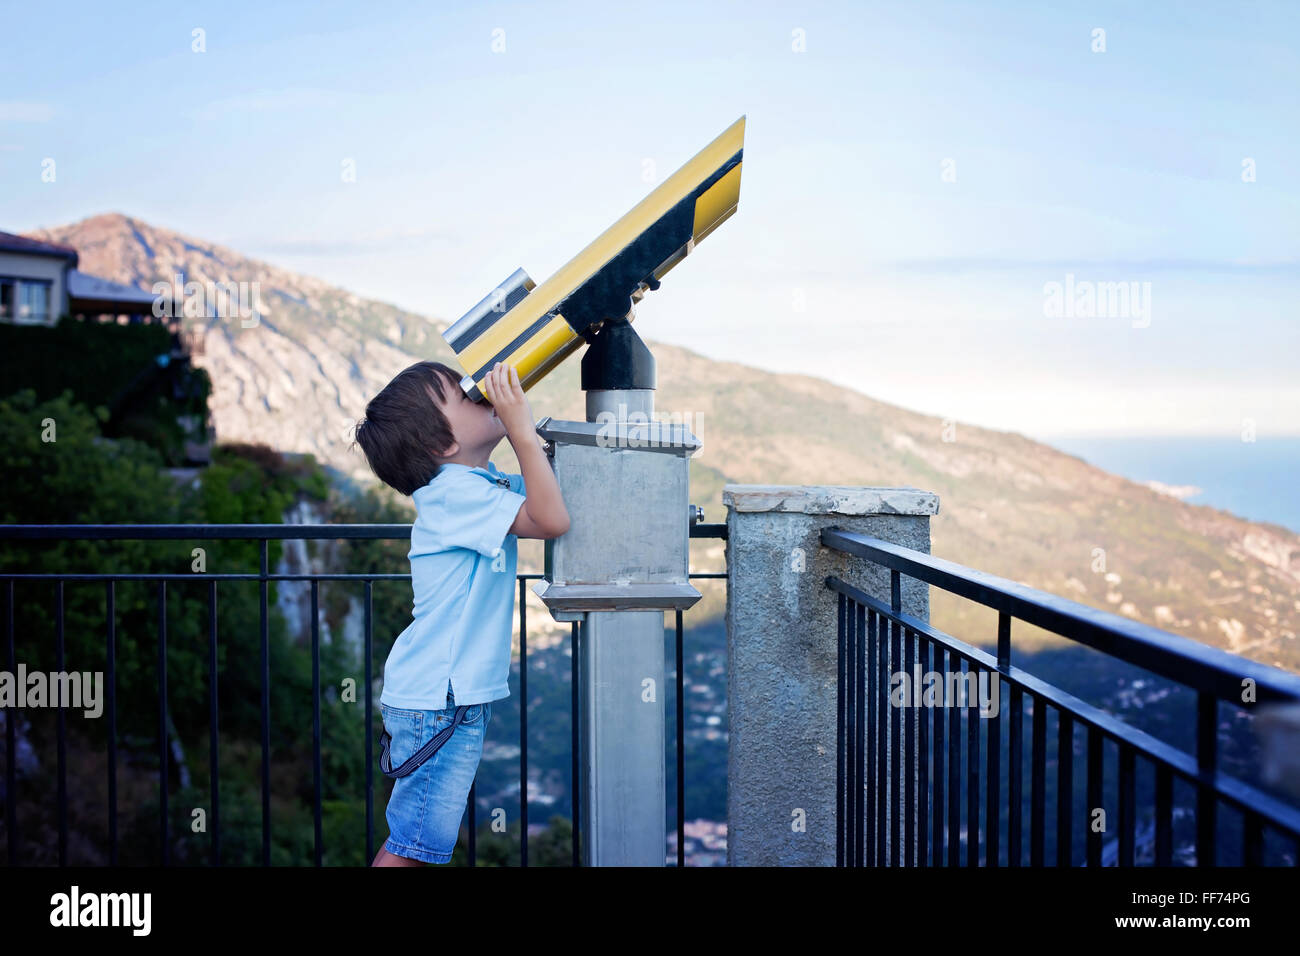 Curious boy, looking through a telescope at something interesting, summertime Stock Photo